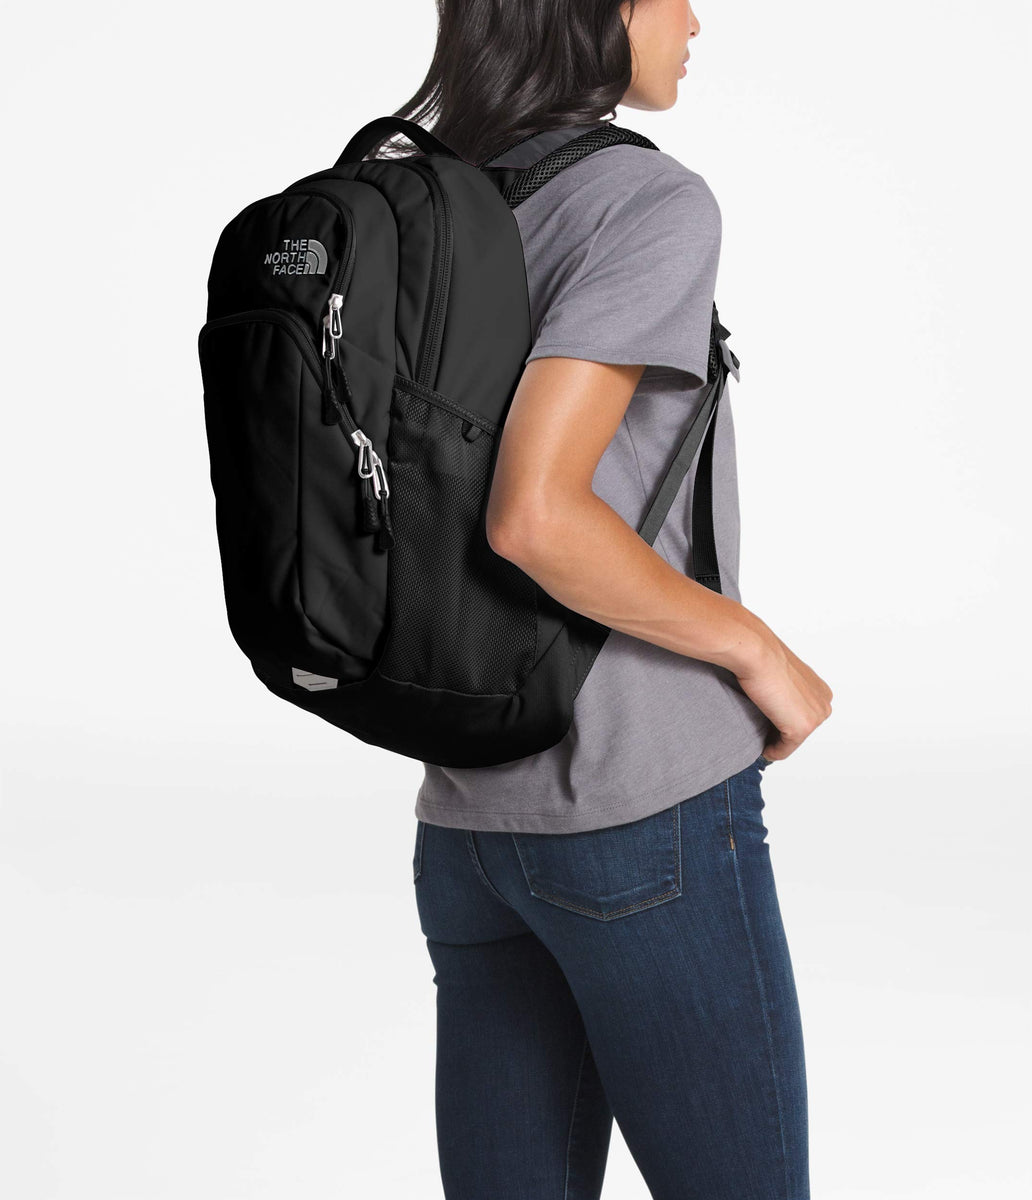 Shop The North Face Women's Pivoter Backp – Luggage Factory